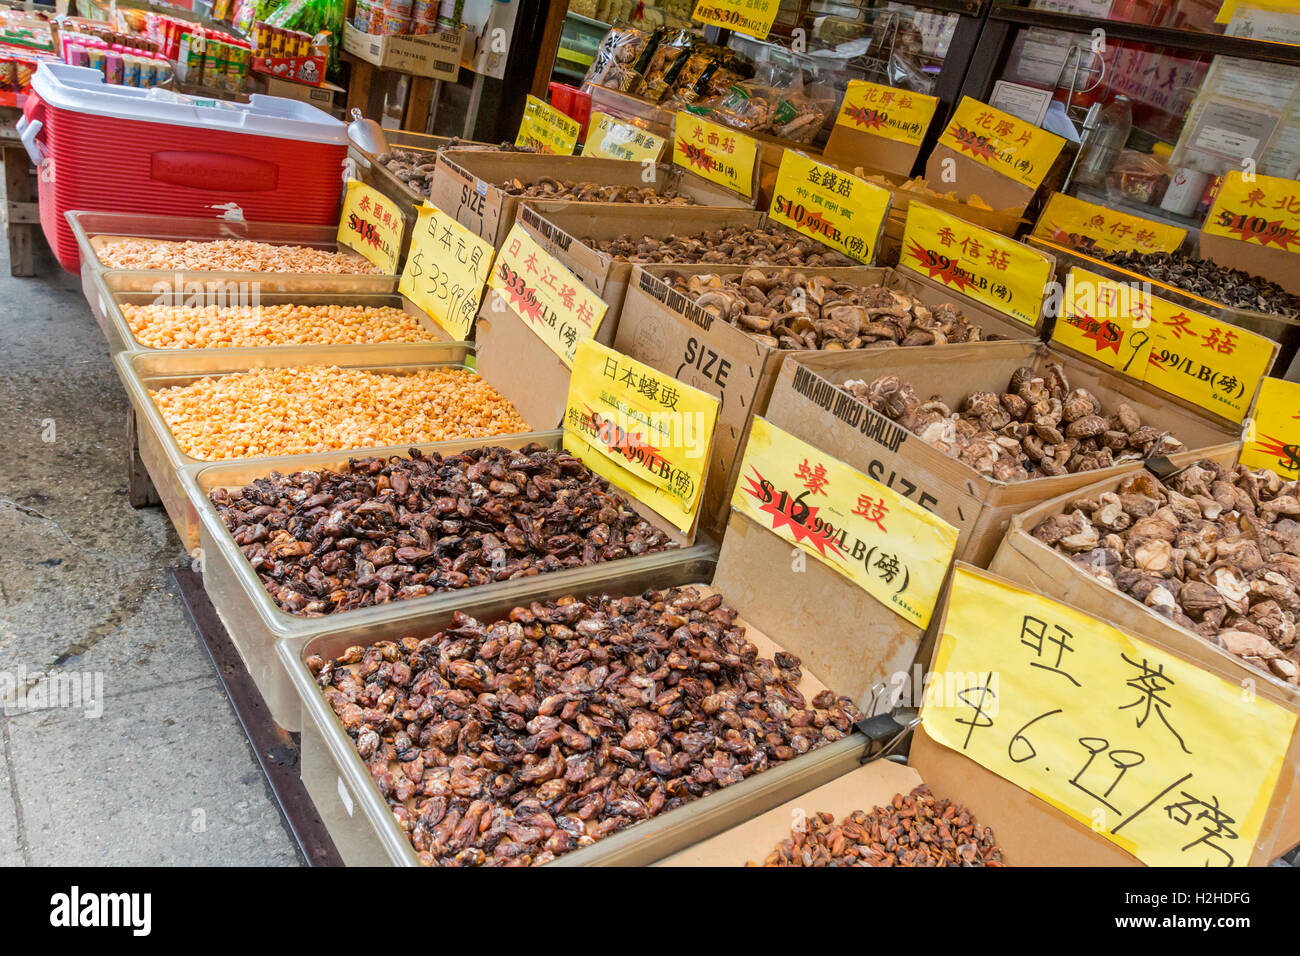 A Chinese grocery market in Chinatown Manhattan New York City The market displays fruit vegetables and other edibles. Stock Photo